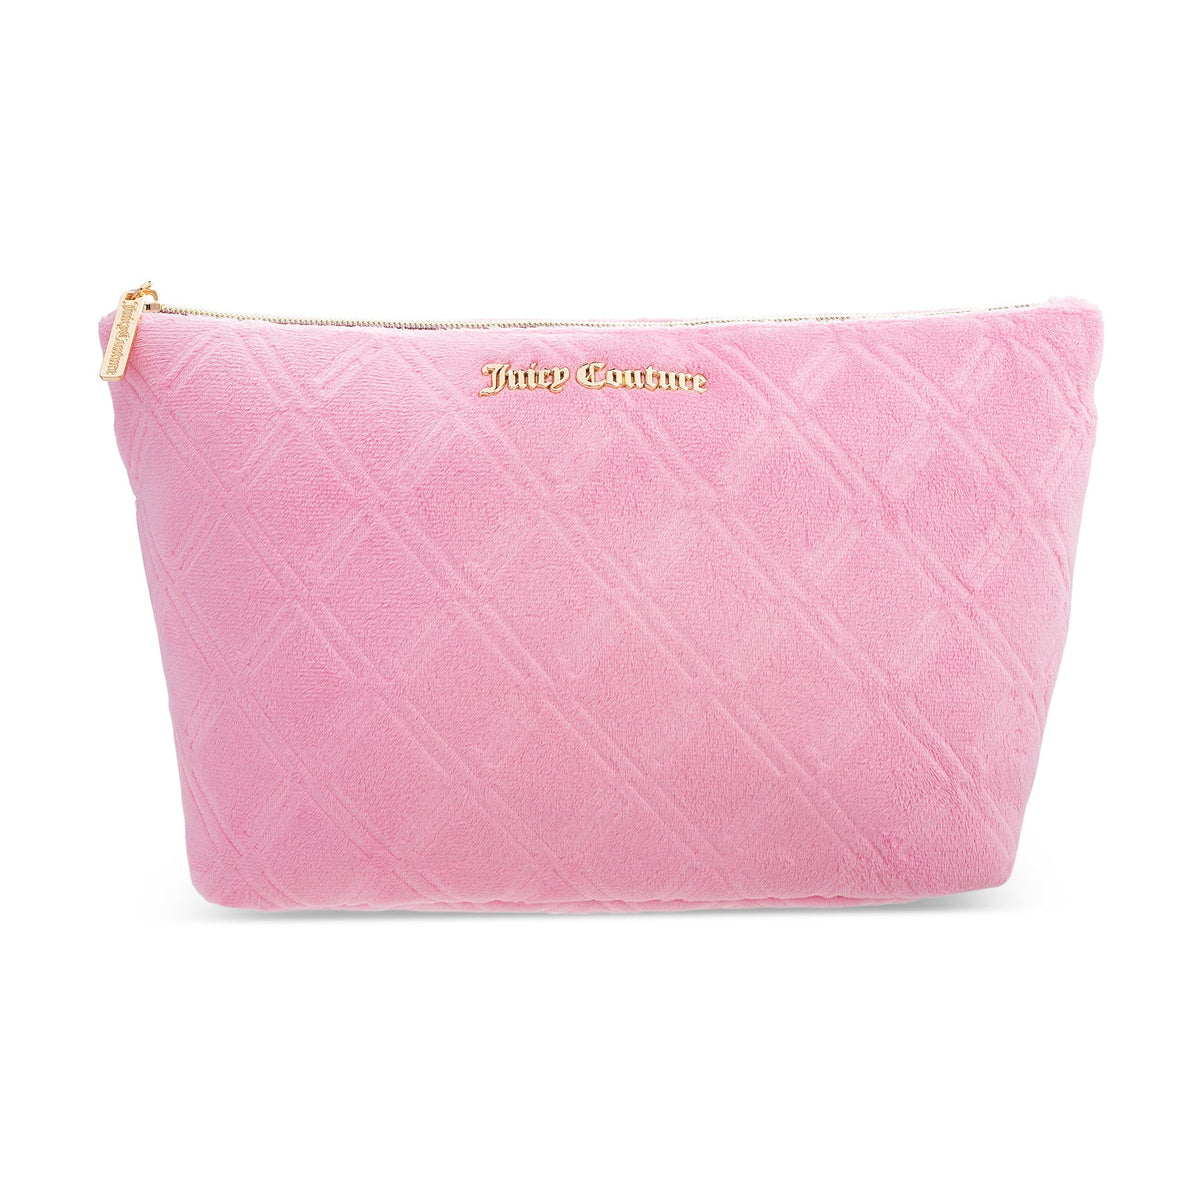 Juicy Couture Logo Makeup Pouch Light Pink